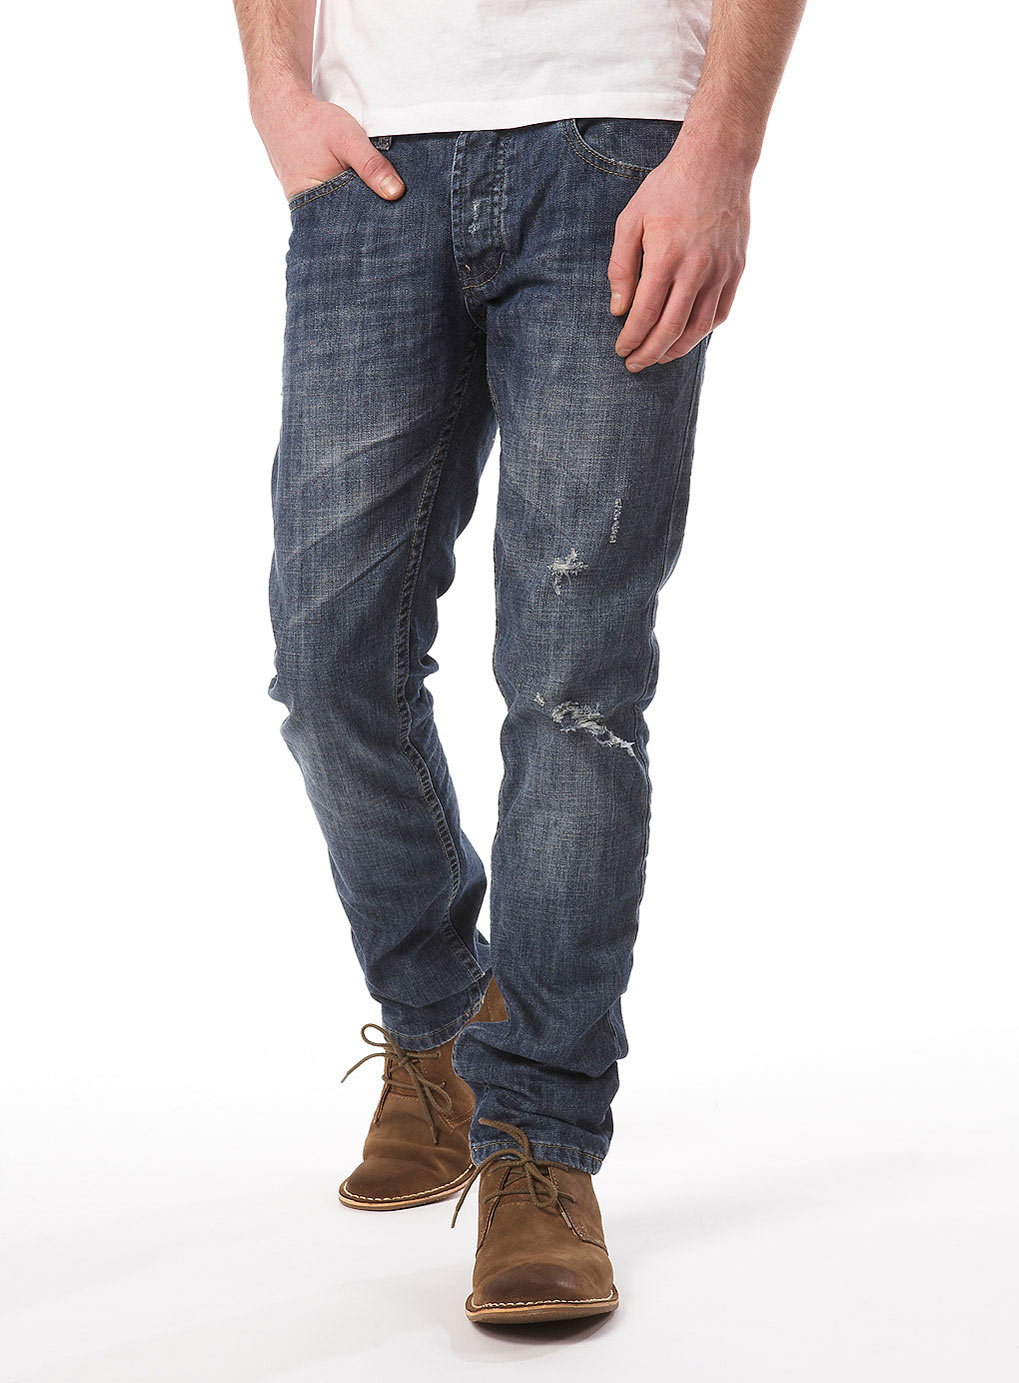 Top 10 Stuffs: Top 10 Most Stylish Jeans For Men